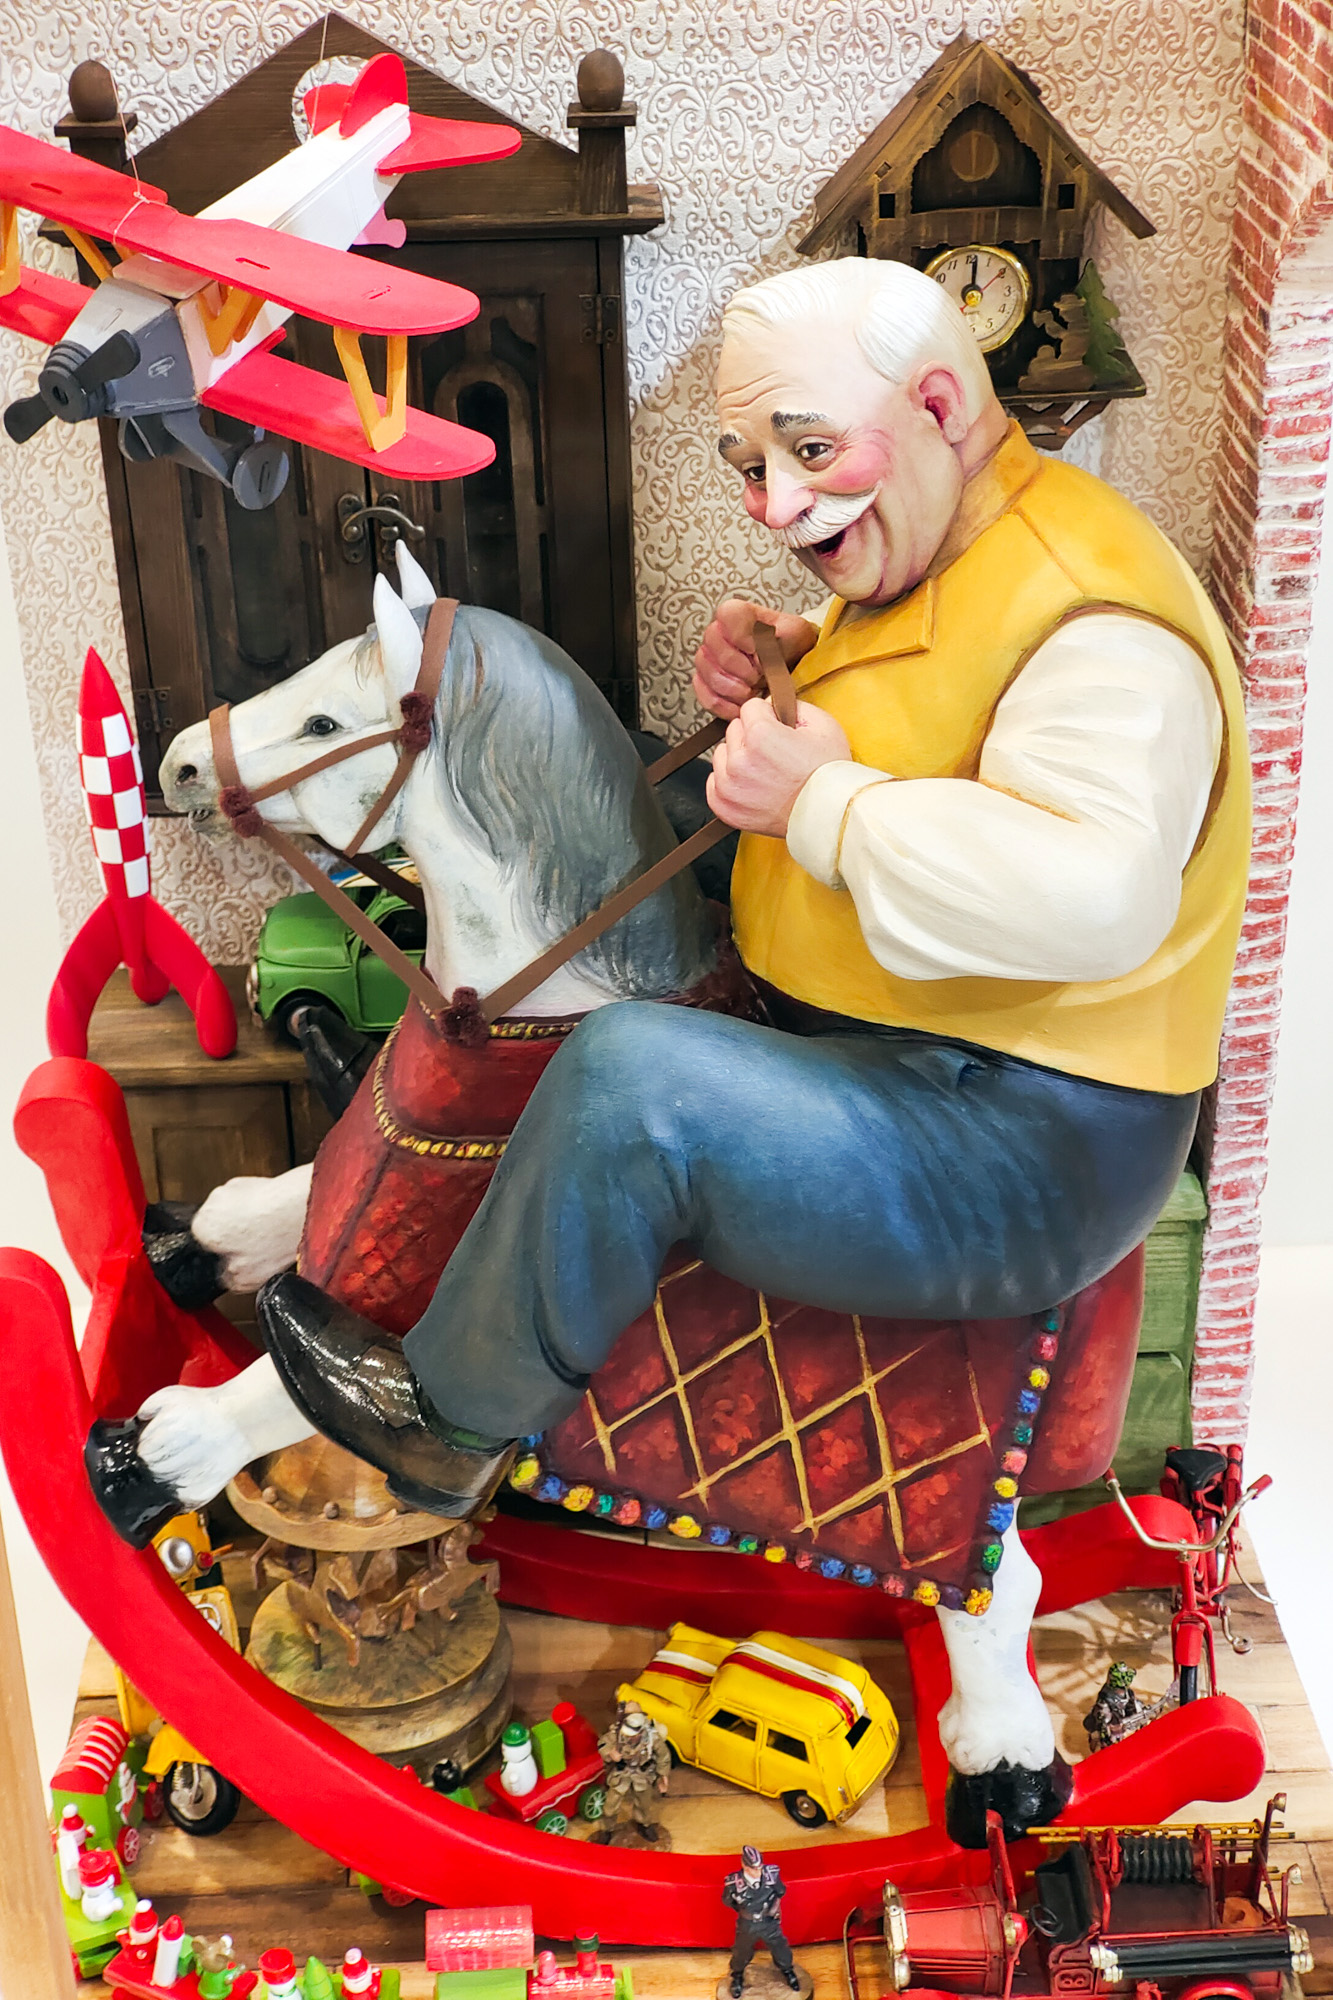 Silly Grandpa on a rocking horse